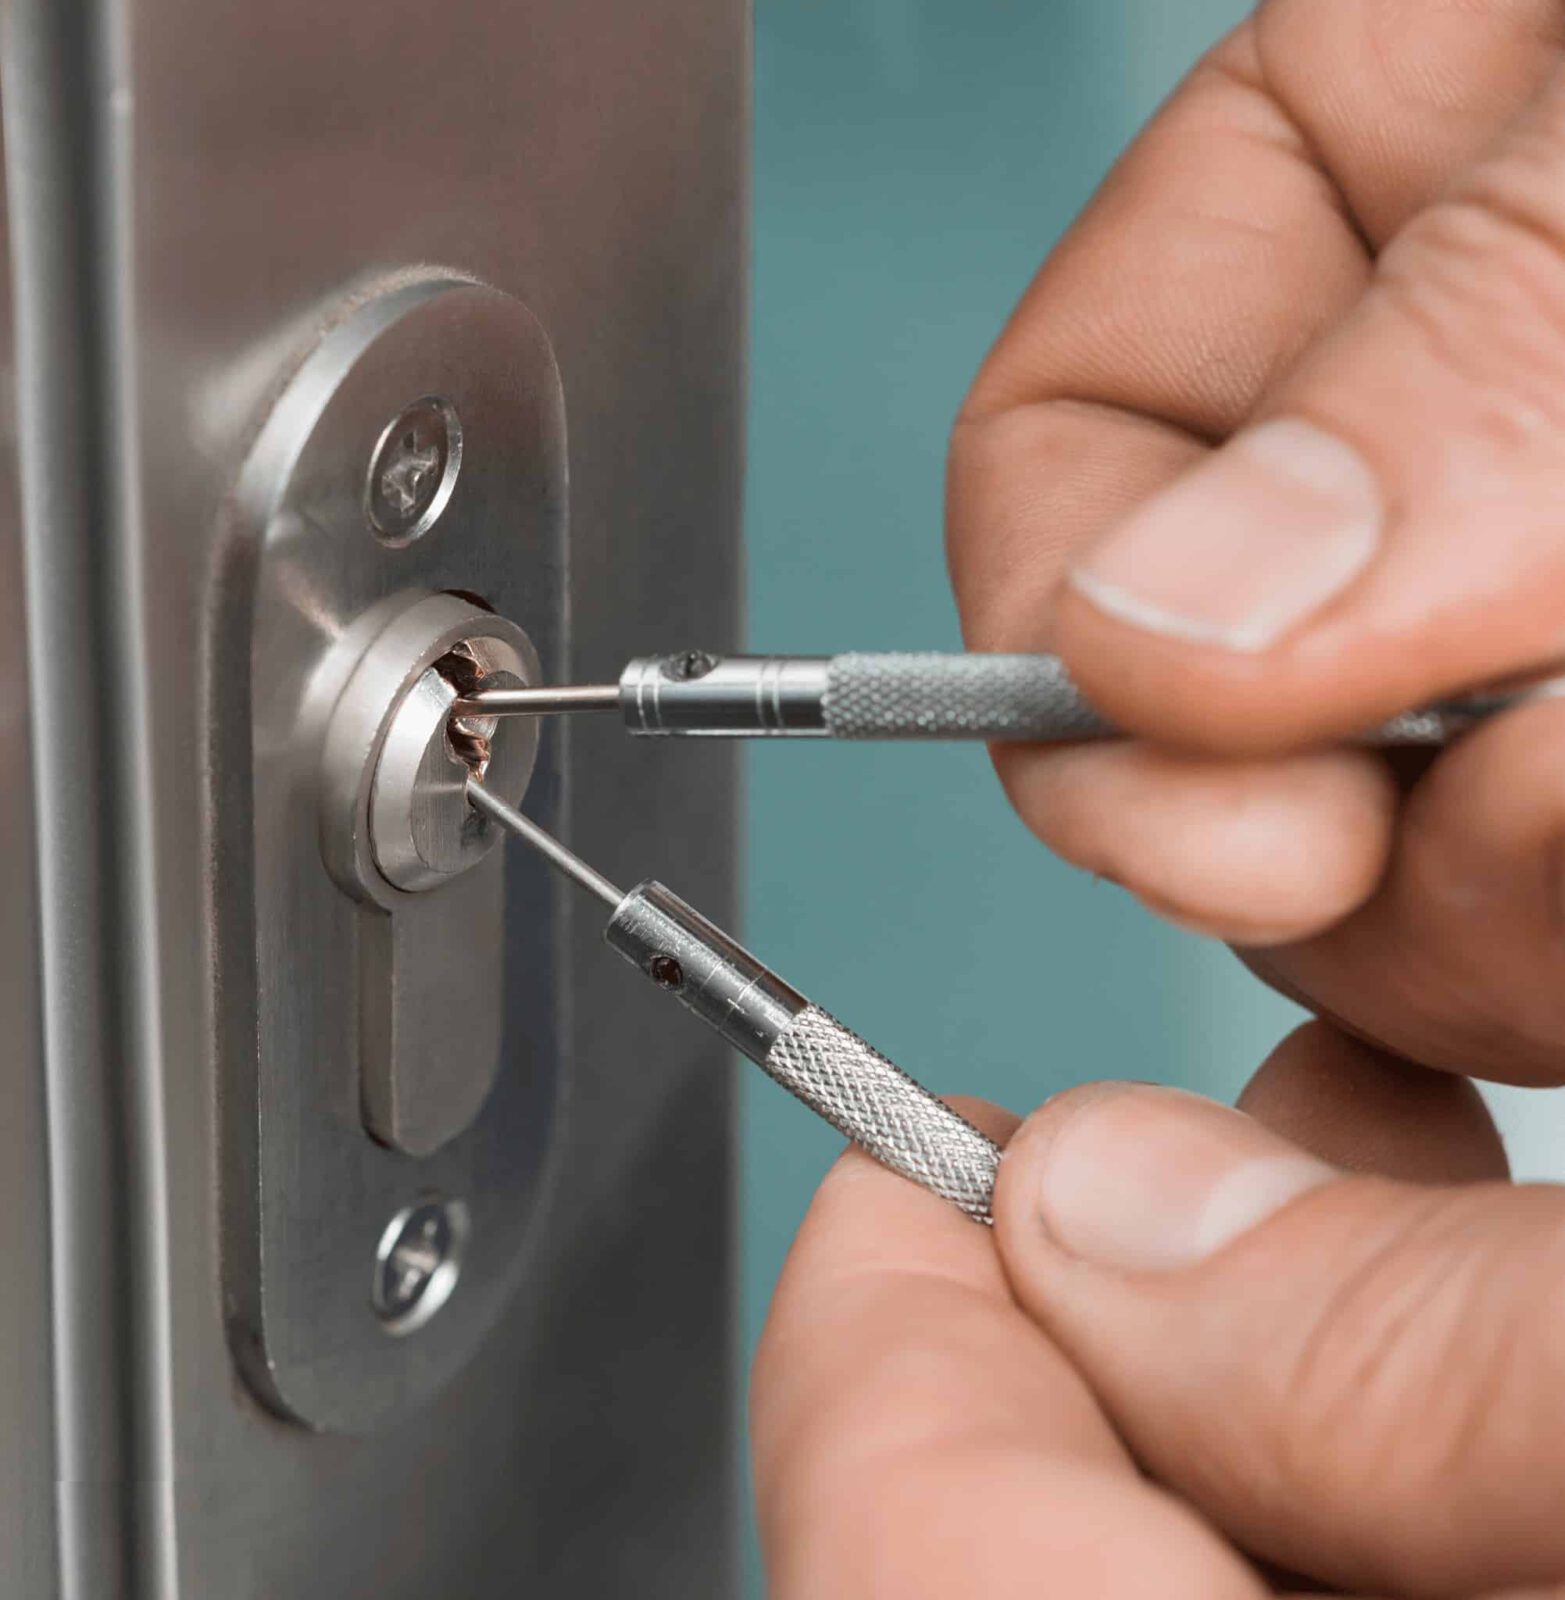 Are You Searching For a Reliable Locksmith Service Provider In Frisco?